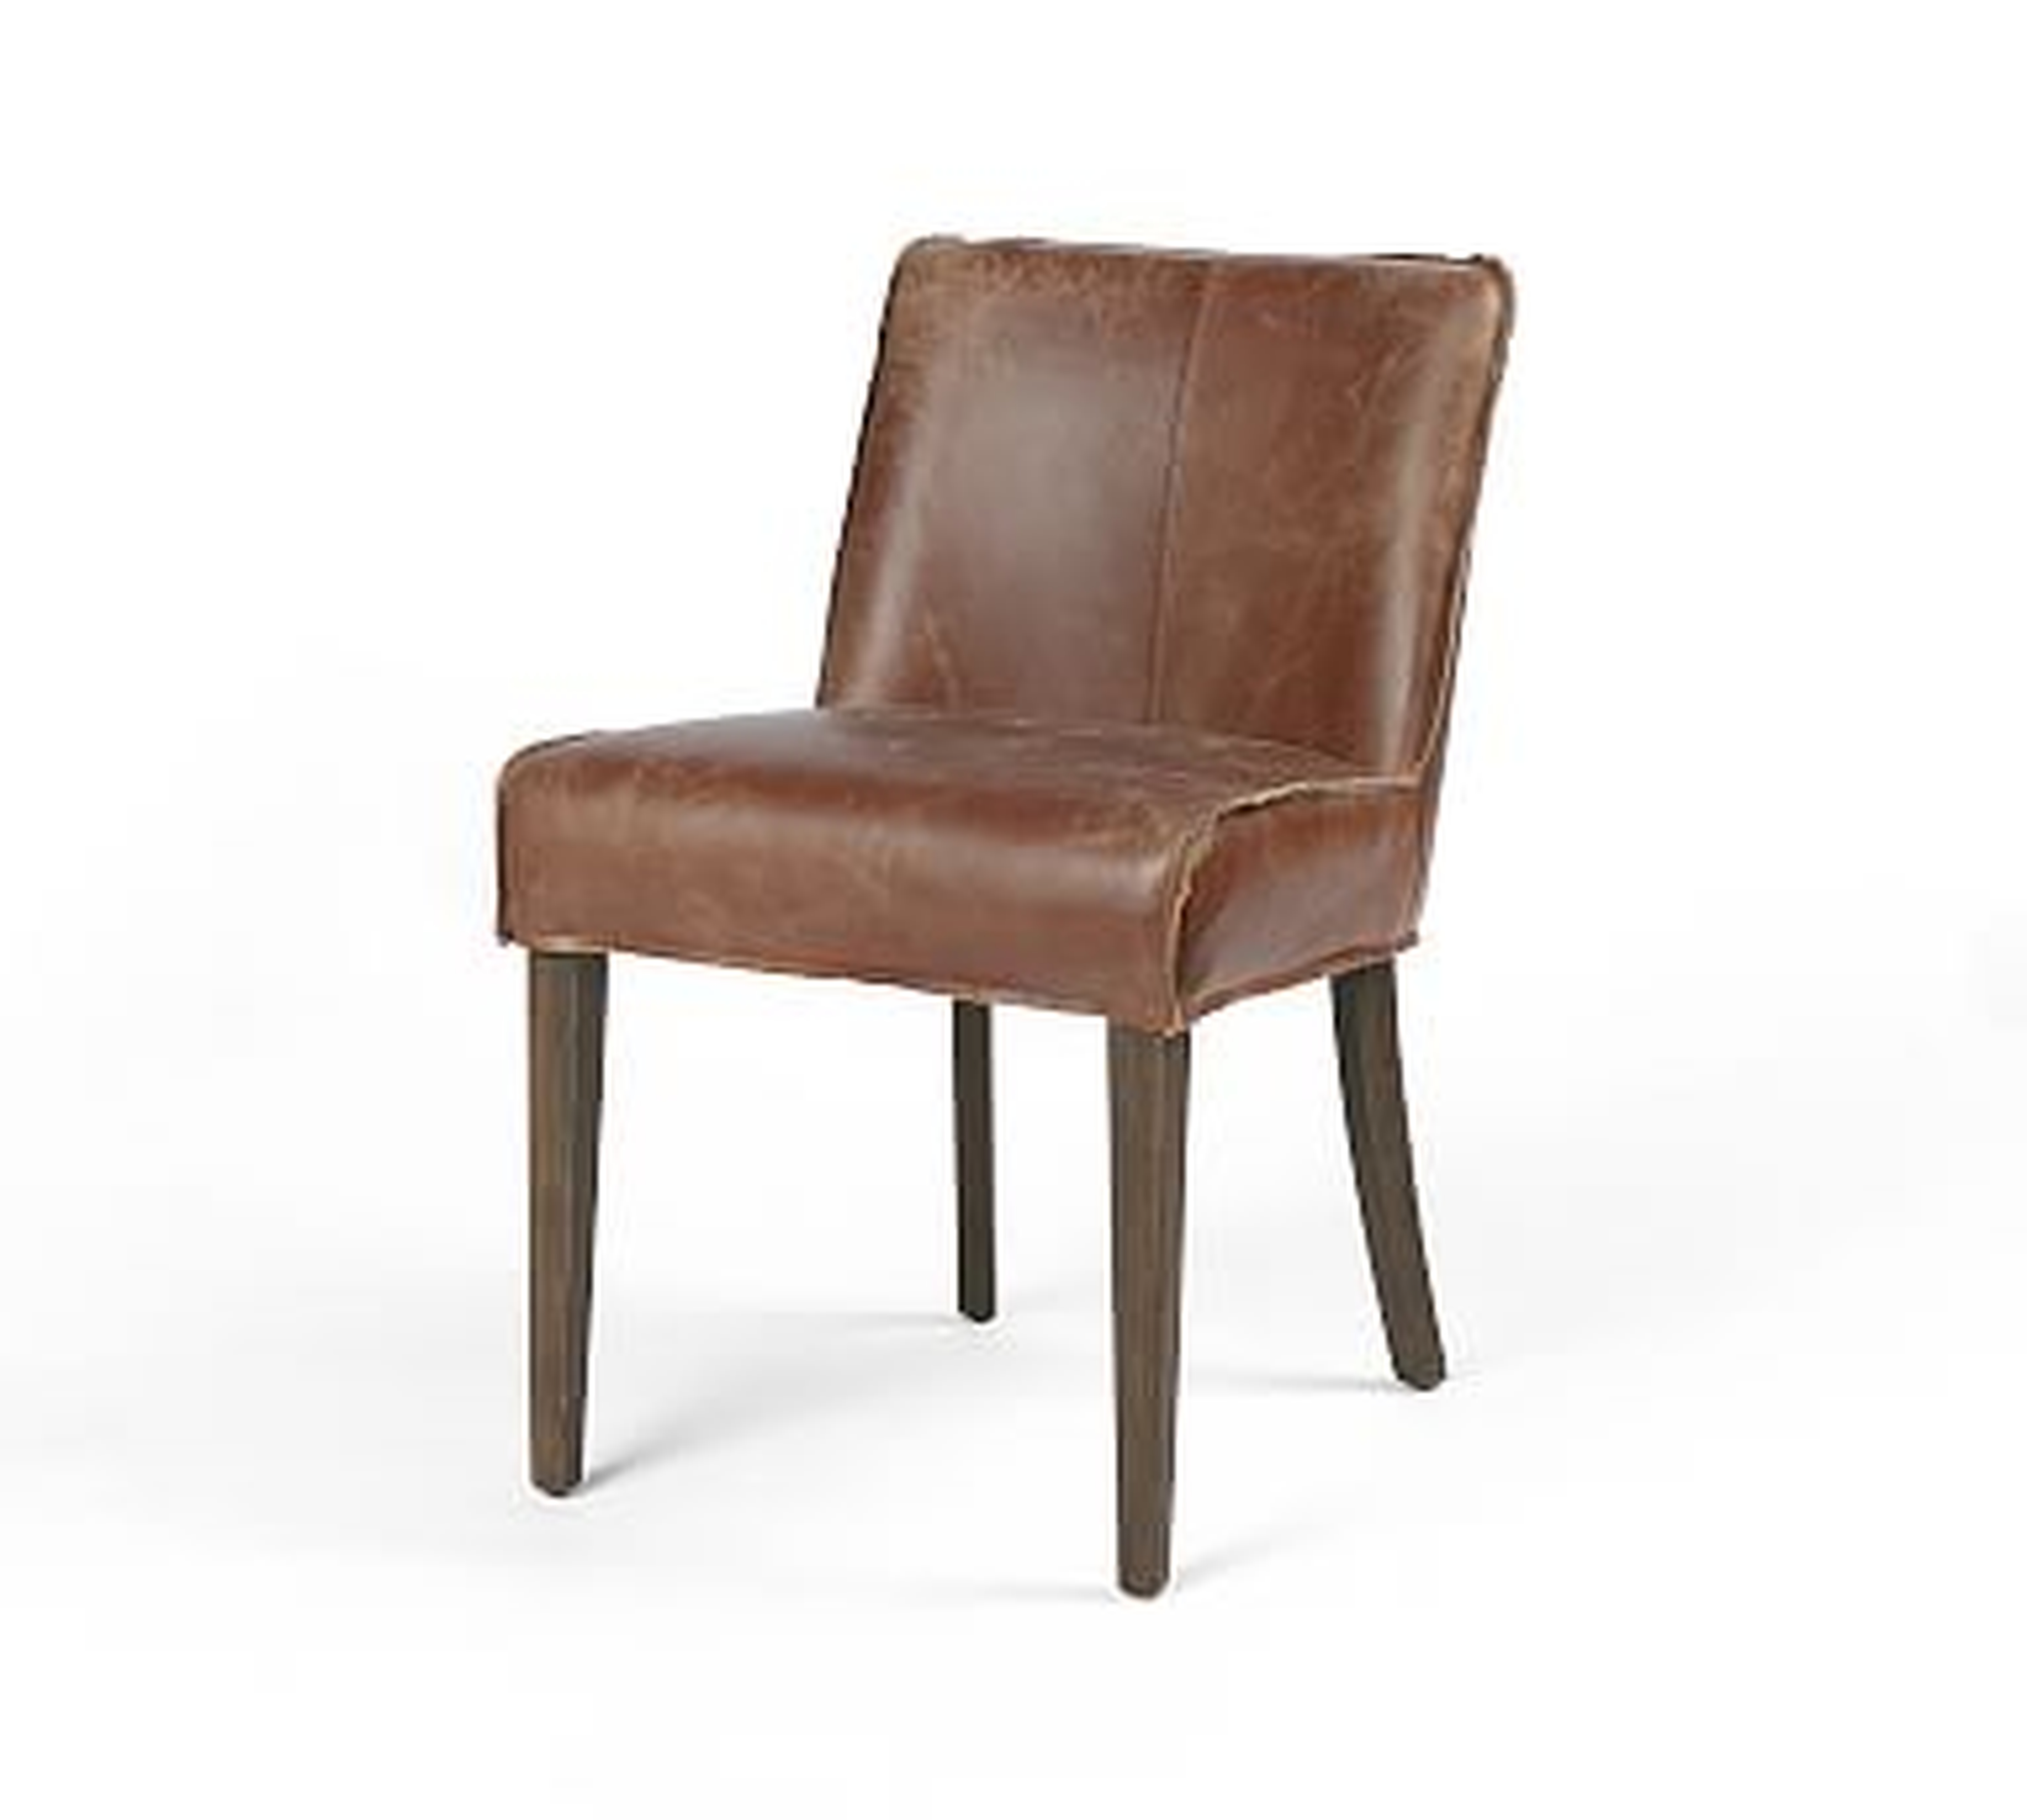 Lombard Leather Dining Chair, Sienna Chestnut - Pottery Barn